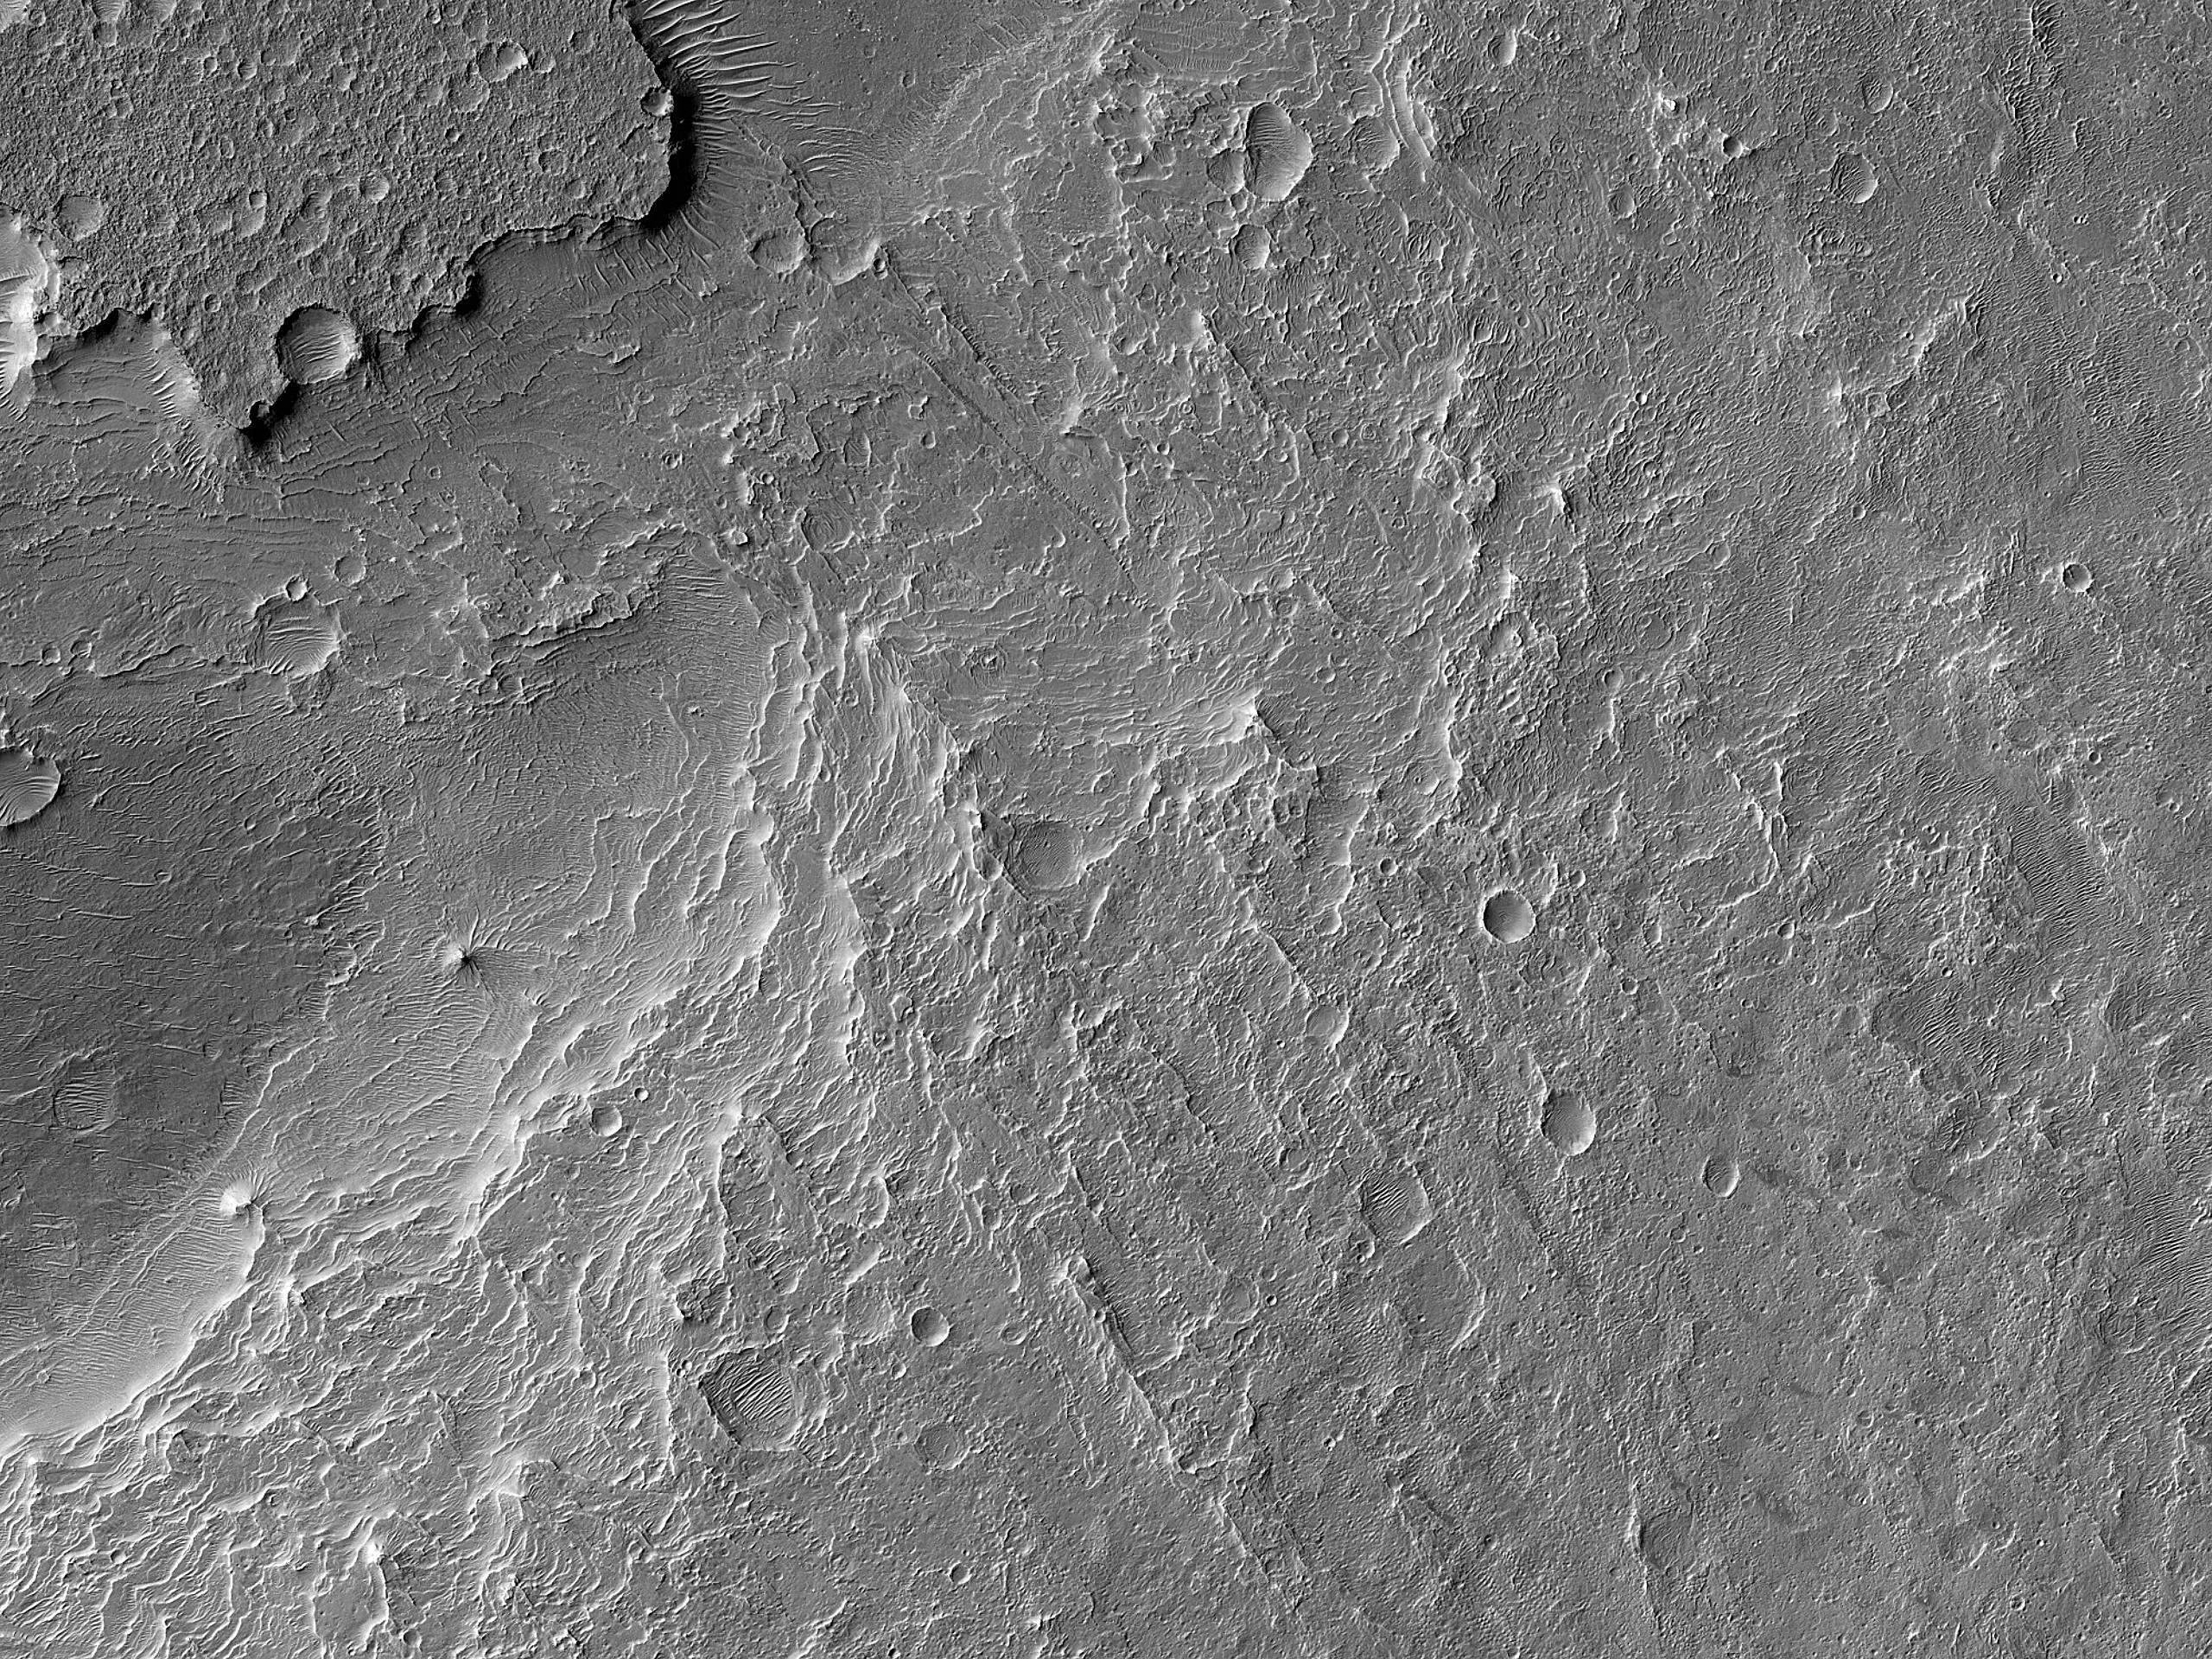 Of Layers in Luba Crater